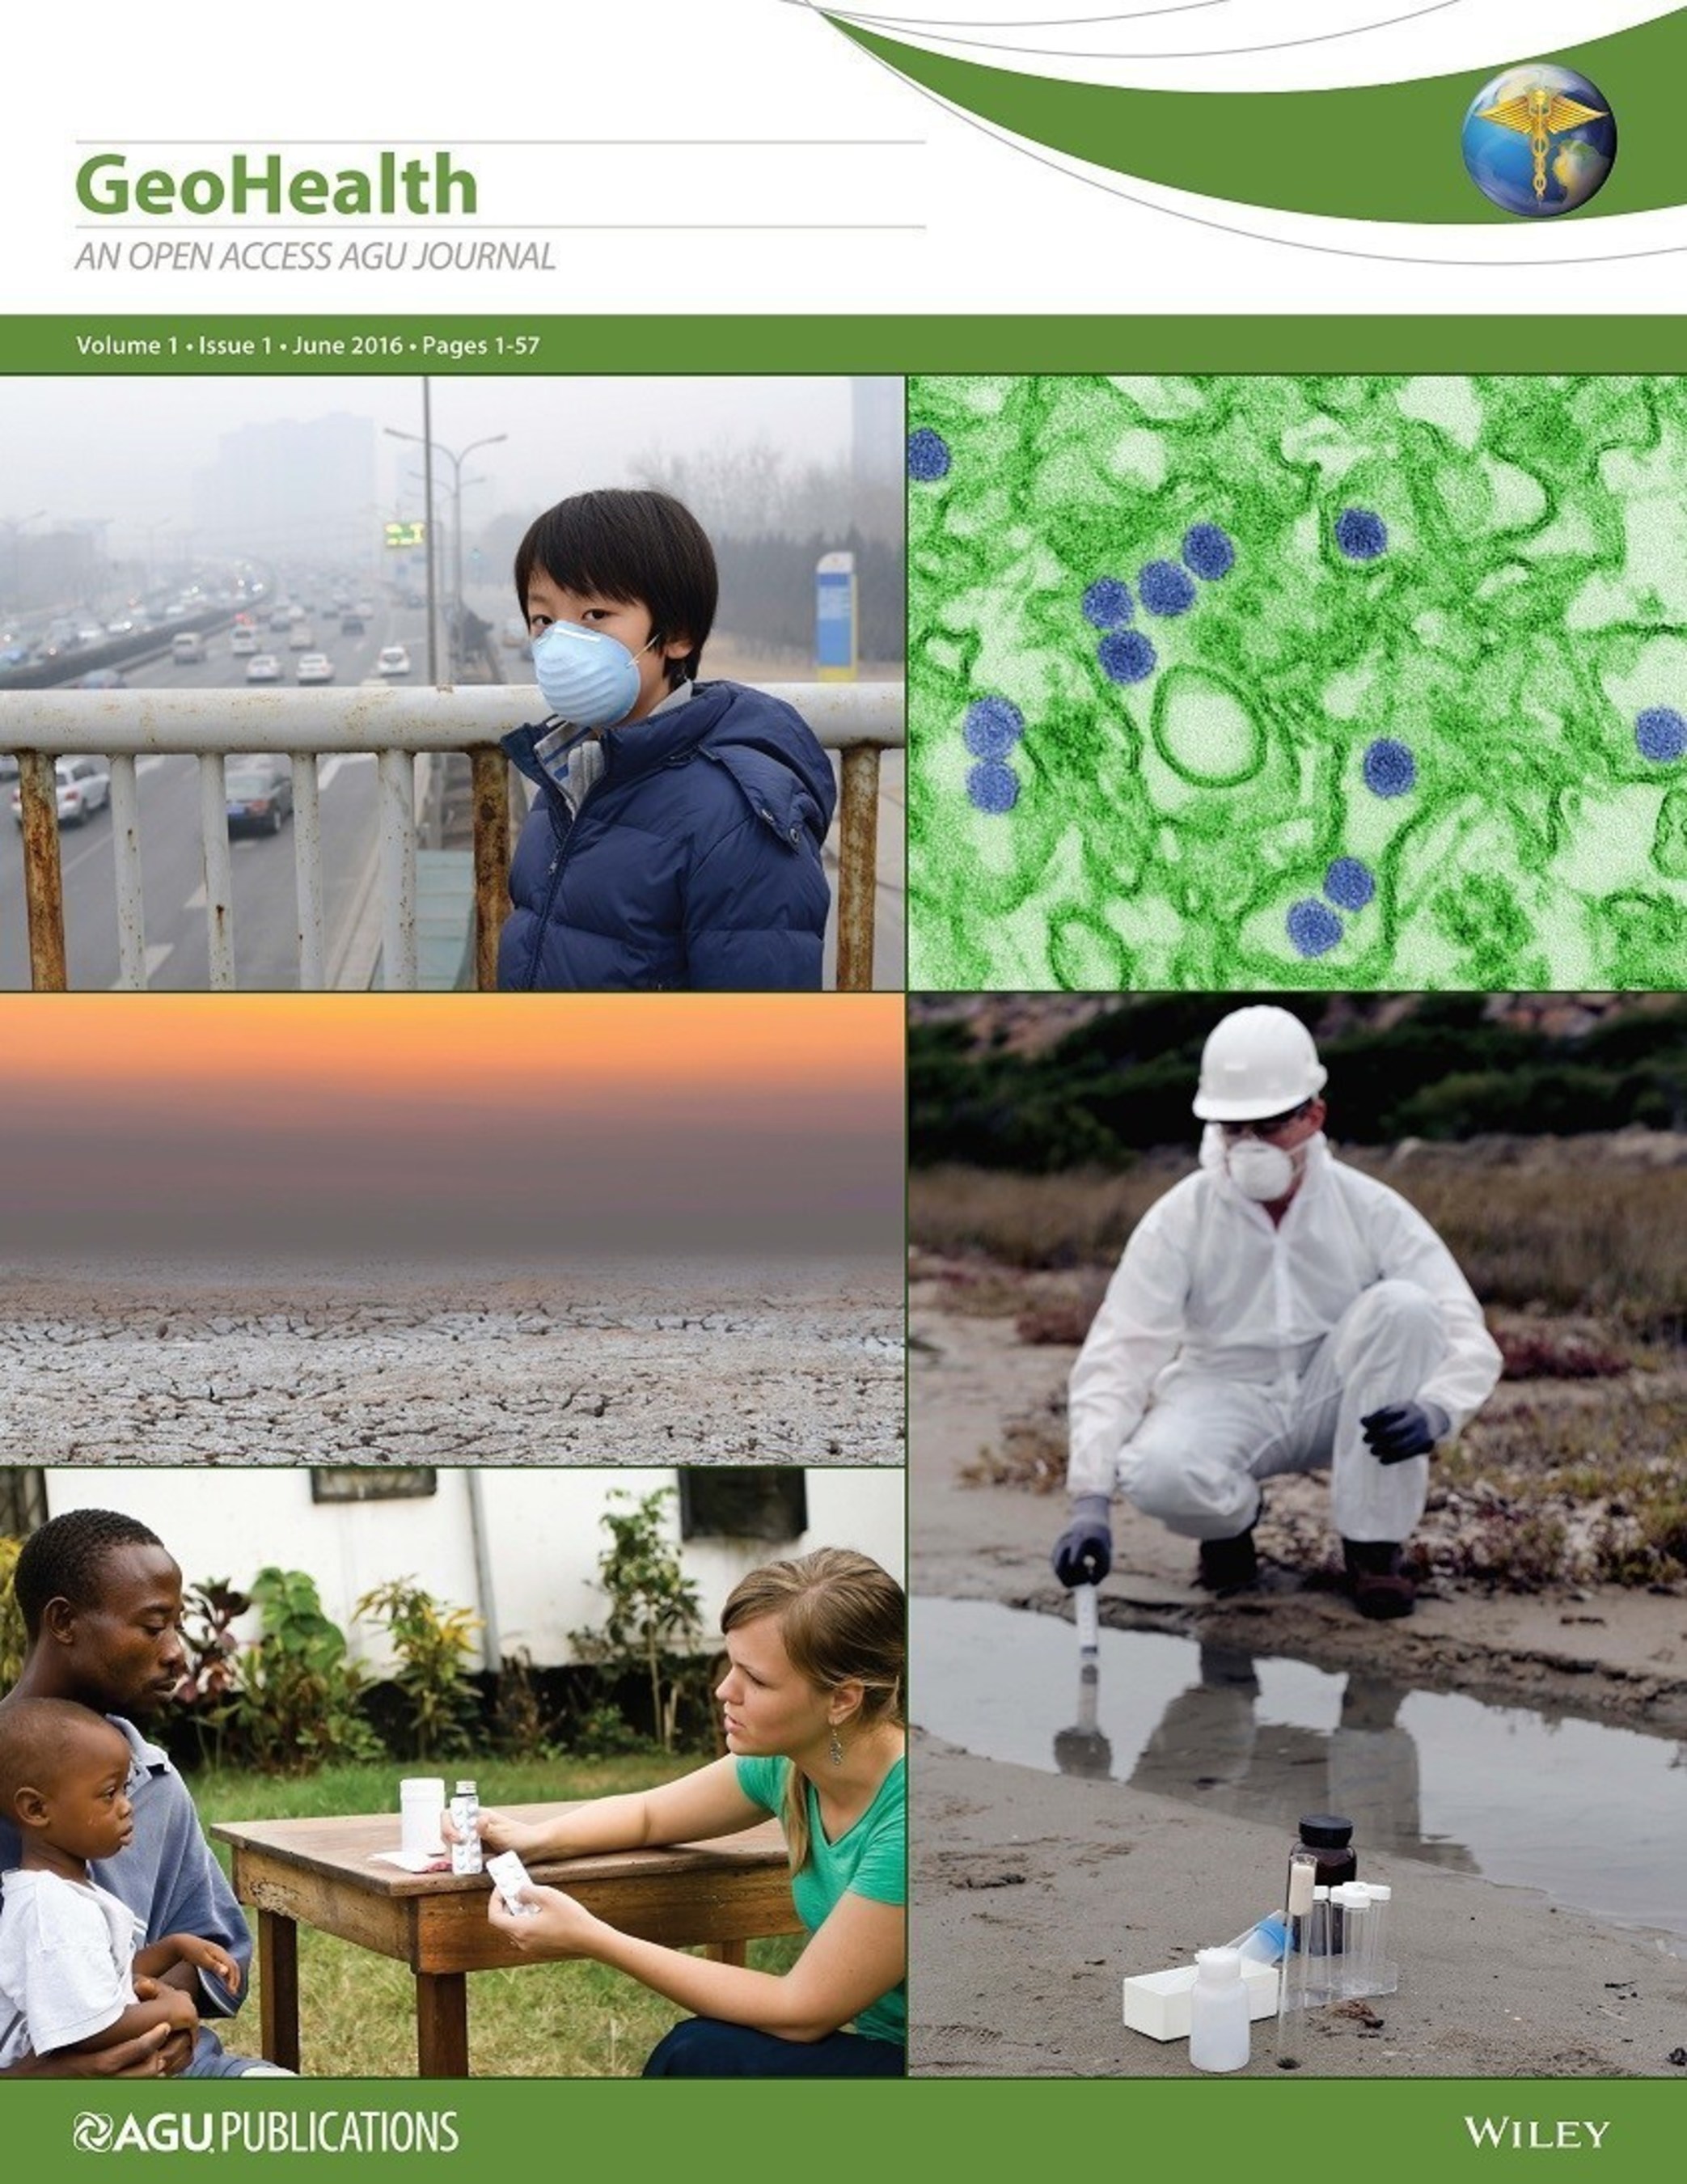 Mock-up cover for the new journal, Geohealth